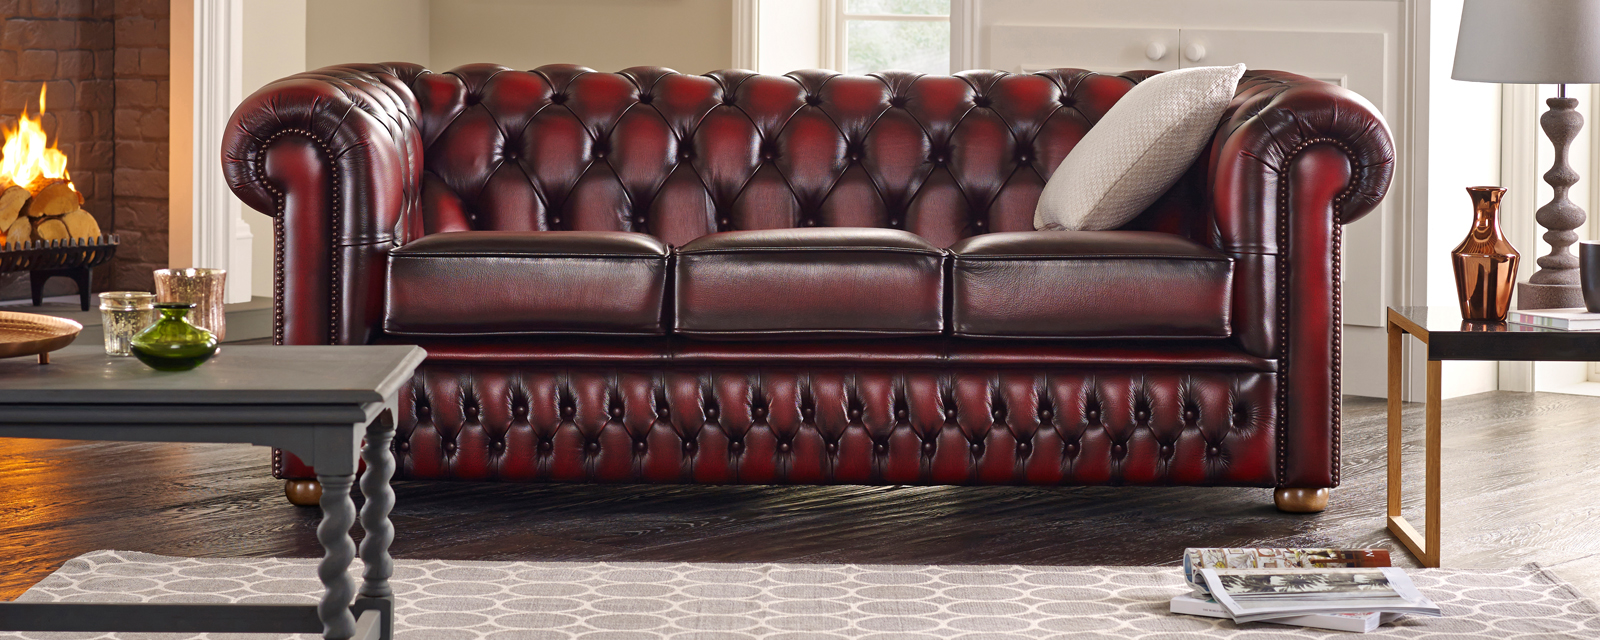 FIVE REASONS TO BUY A LEATHER SOFA